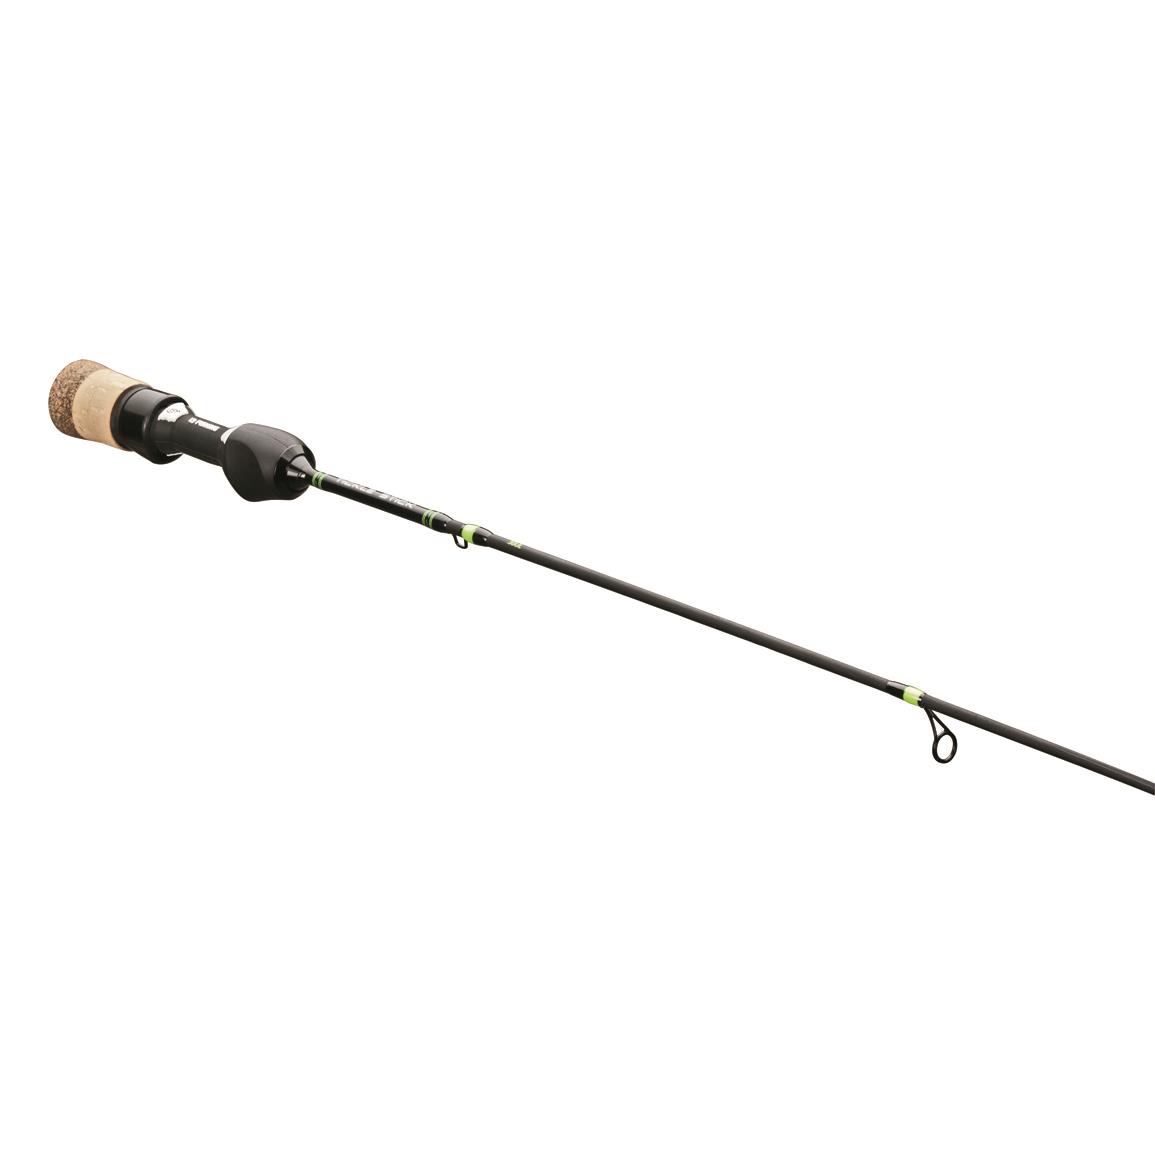 13 Fishing Snitch Pro Ice Fishing Rod, 23 Length, Quick Tip - 728913, Ice  Fishing Rods at Sportsman's Guide